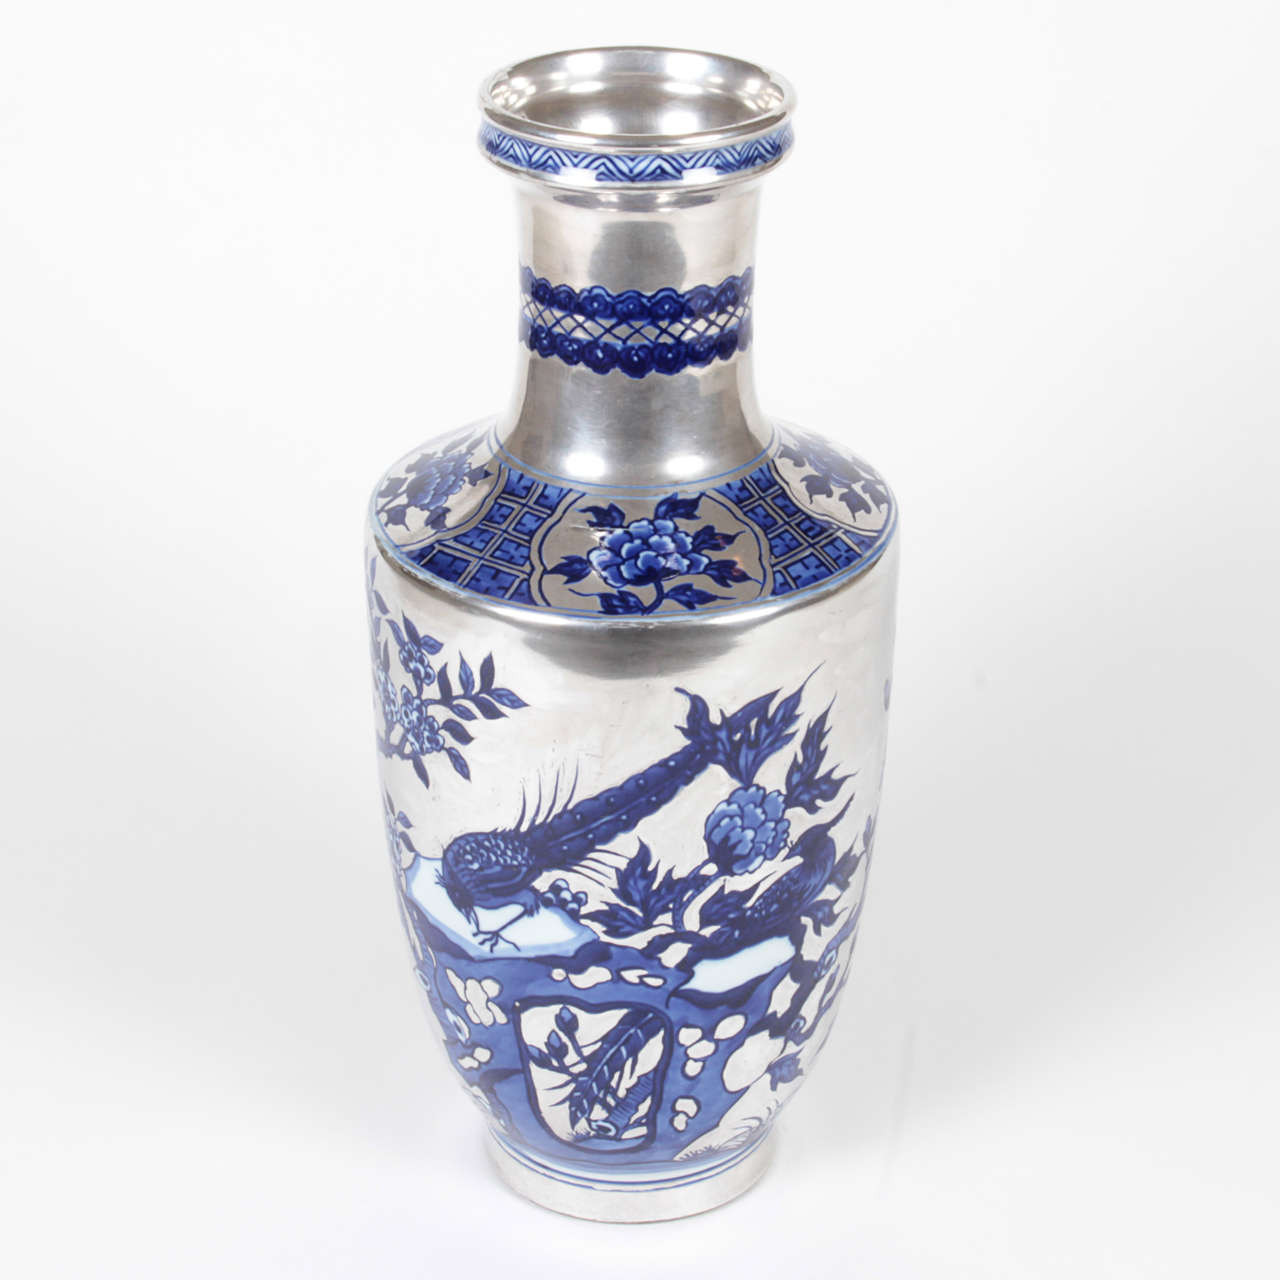 Vintage silver Chinese vase with hand-painted details in striking blue. The vibrant colors make this item modern with a traditional motif. The tapered stem adds an elegant touch to flower arrangement.